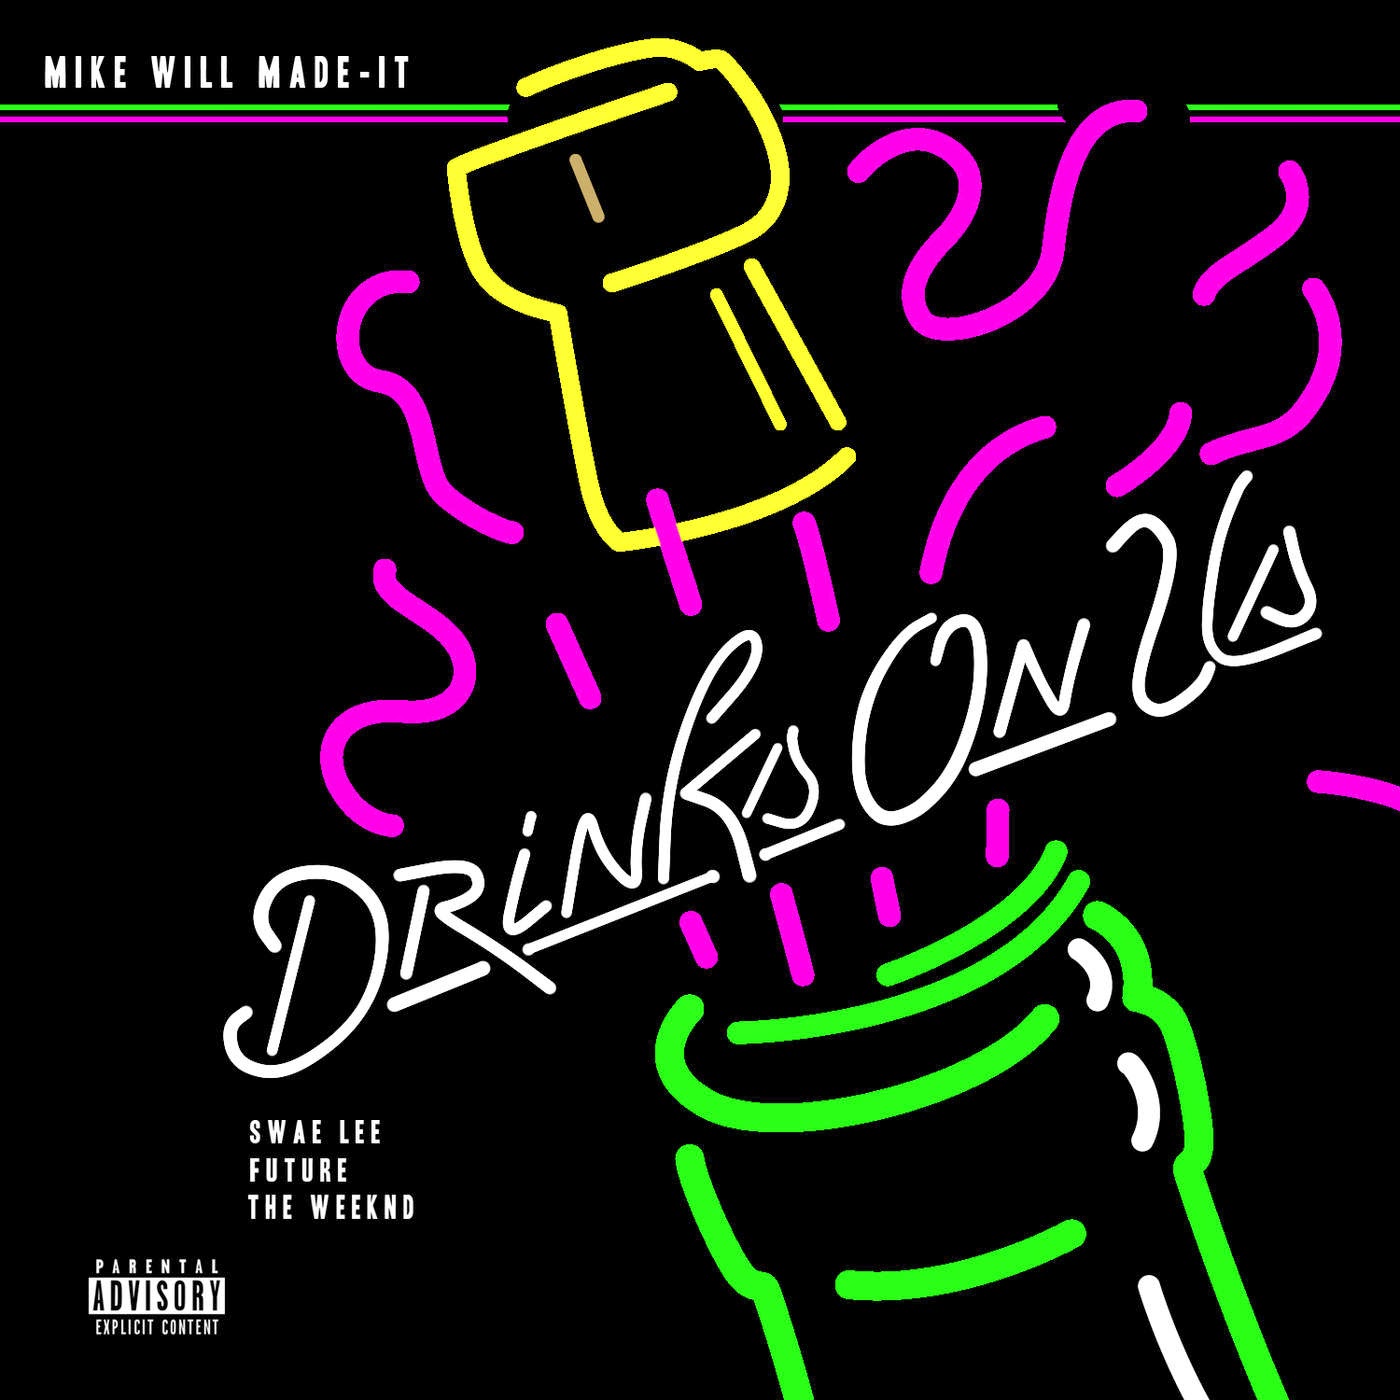 Mike WiLL Made It – 'Drinks On Us' (Feat. Swae Lee, Future & The Weeknd) (New ...